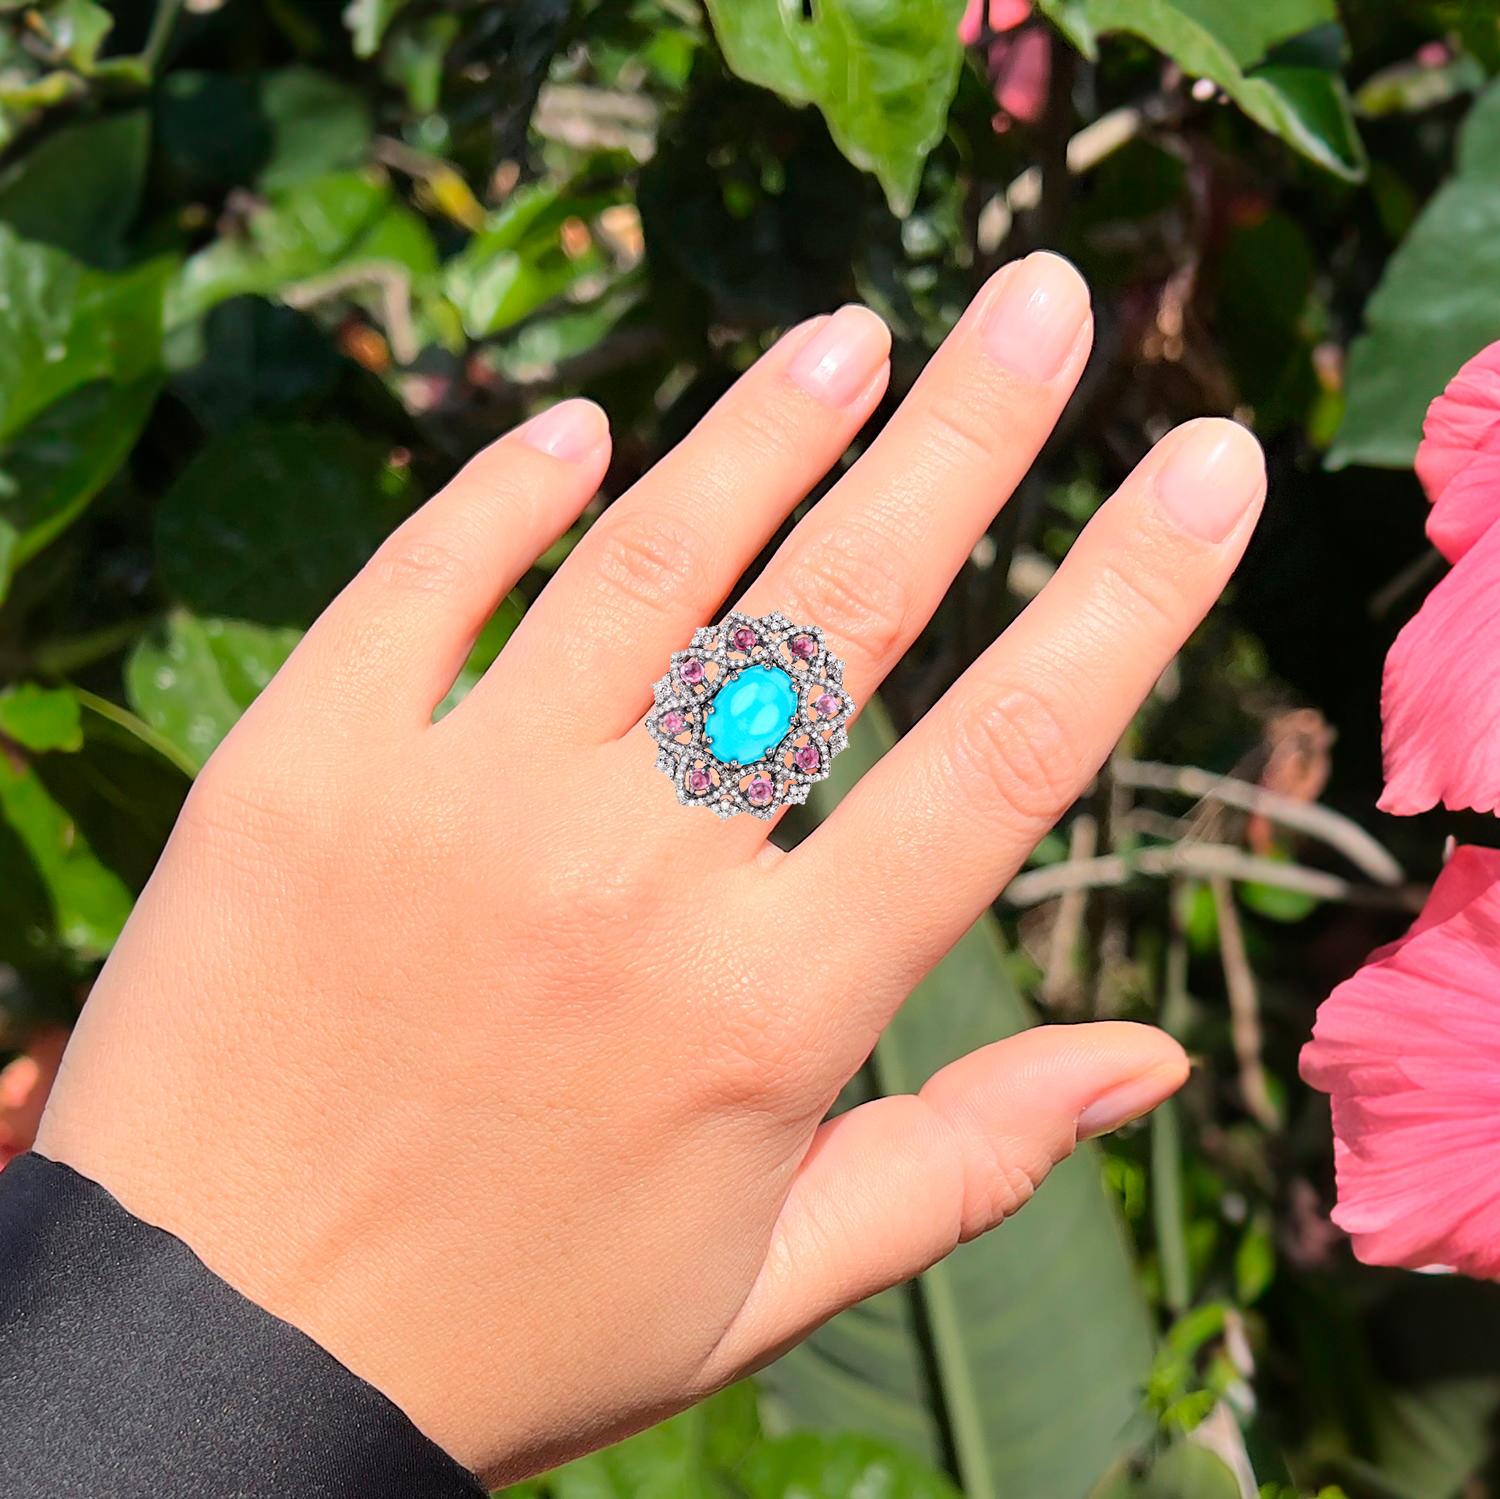 Contemporary Turquoise Floral Cocktail Ring Pink Tourmalines Diamonds 7.5 Carats For Sale